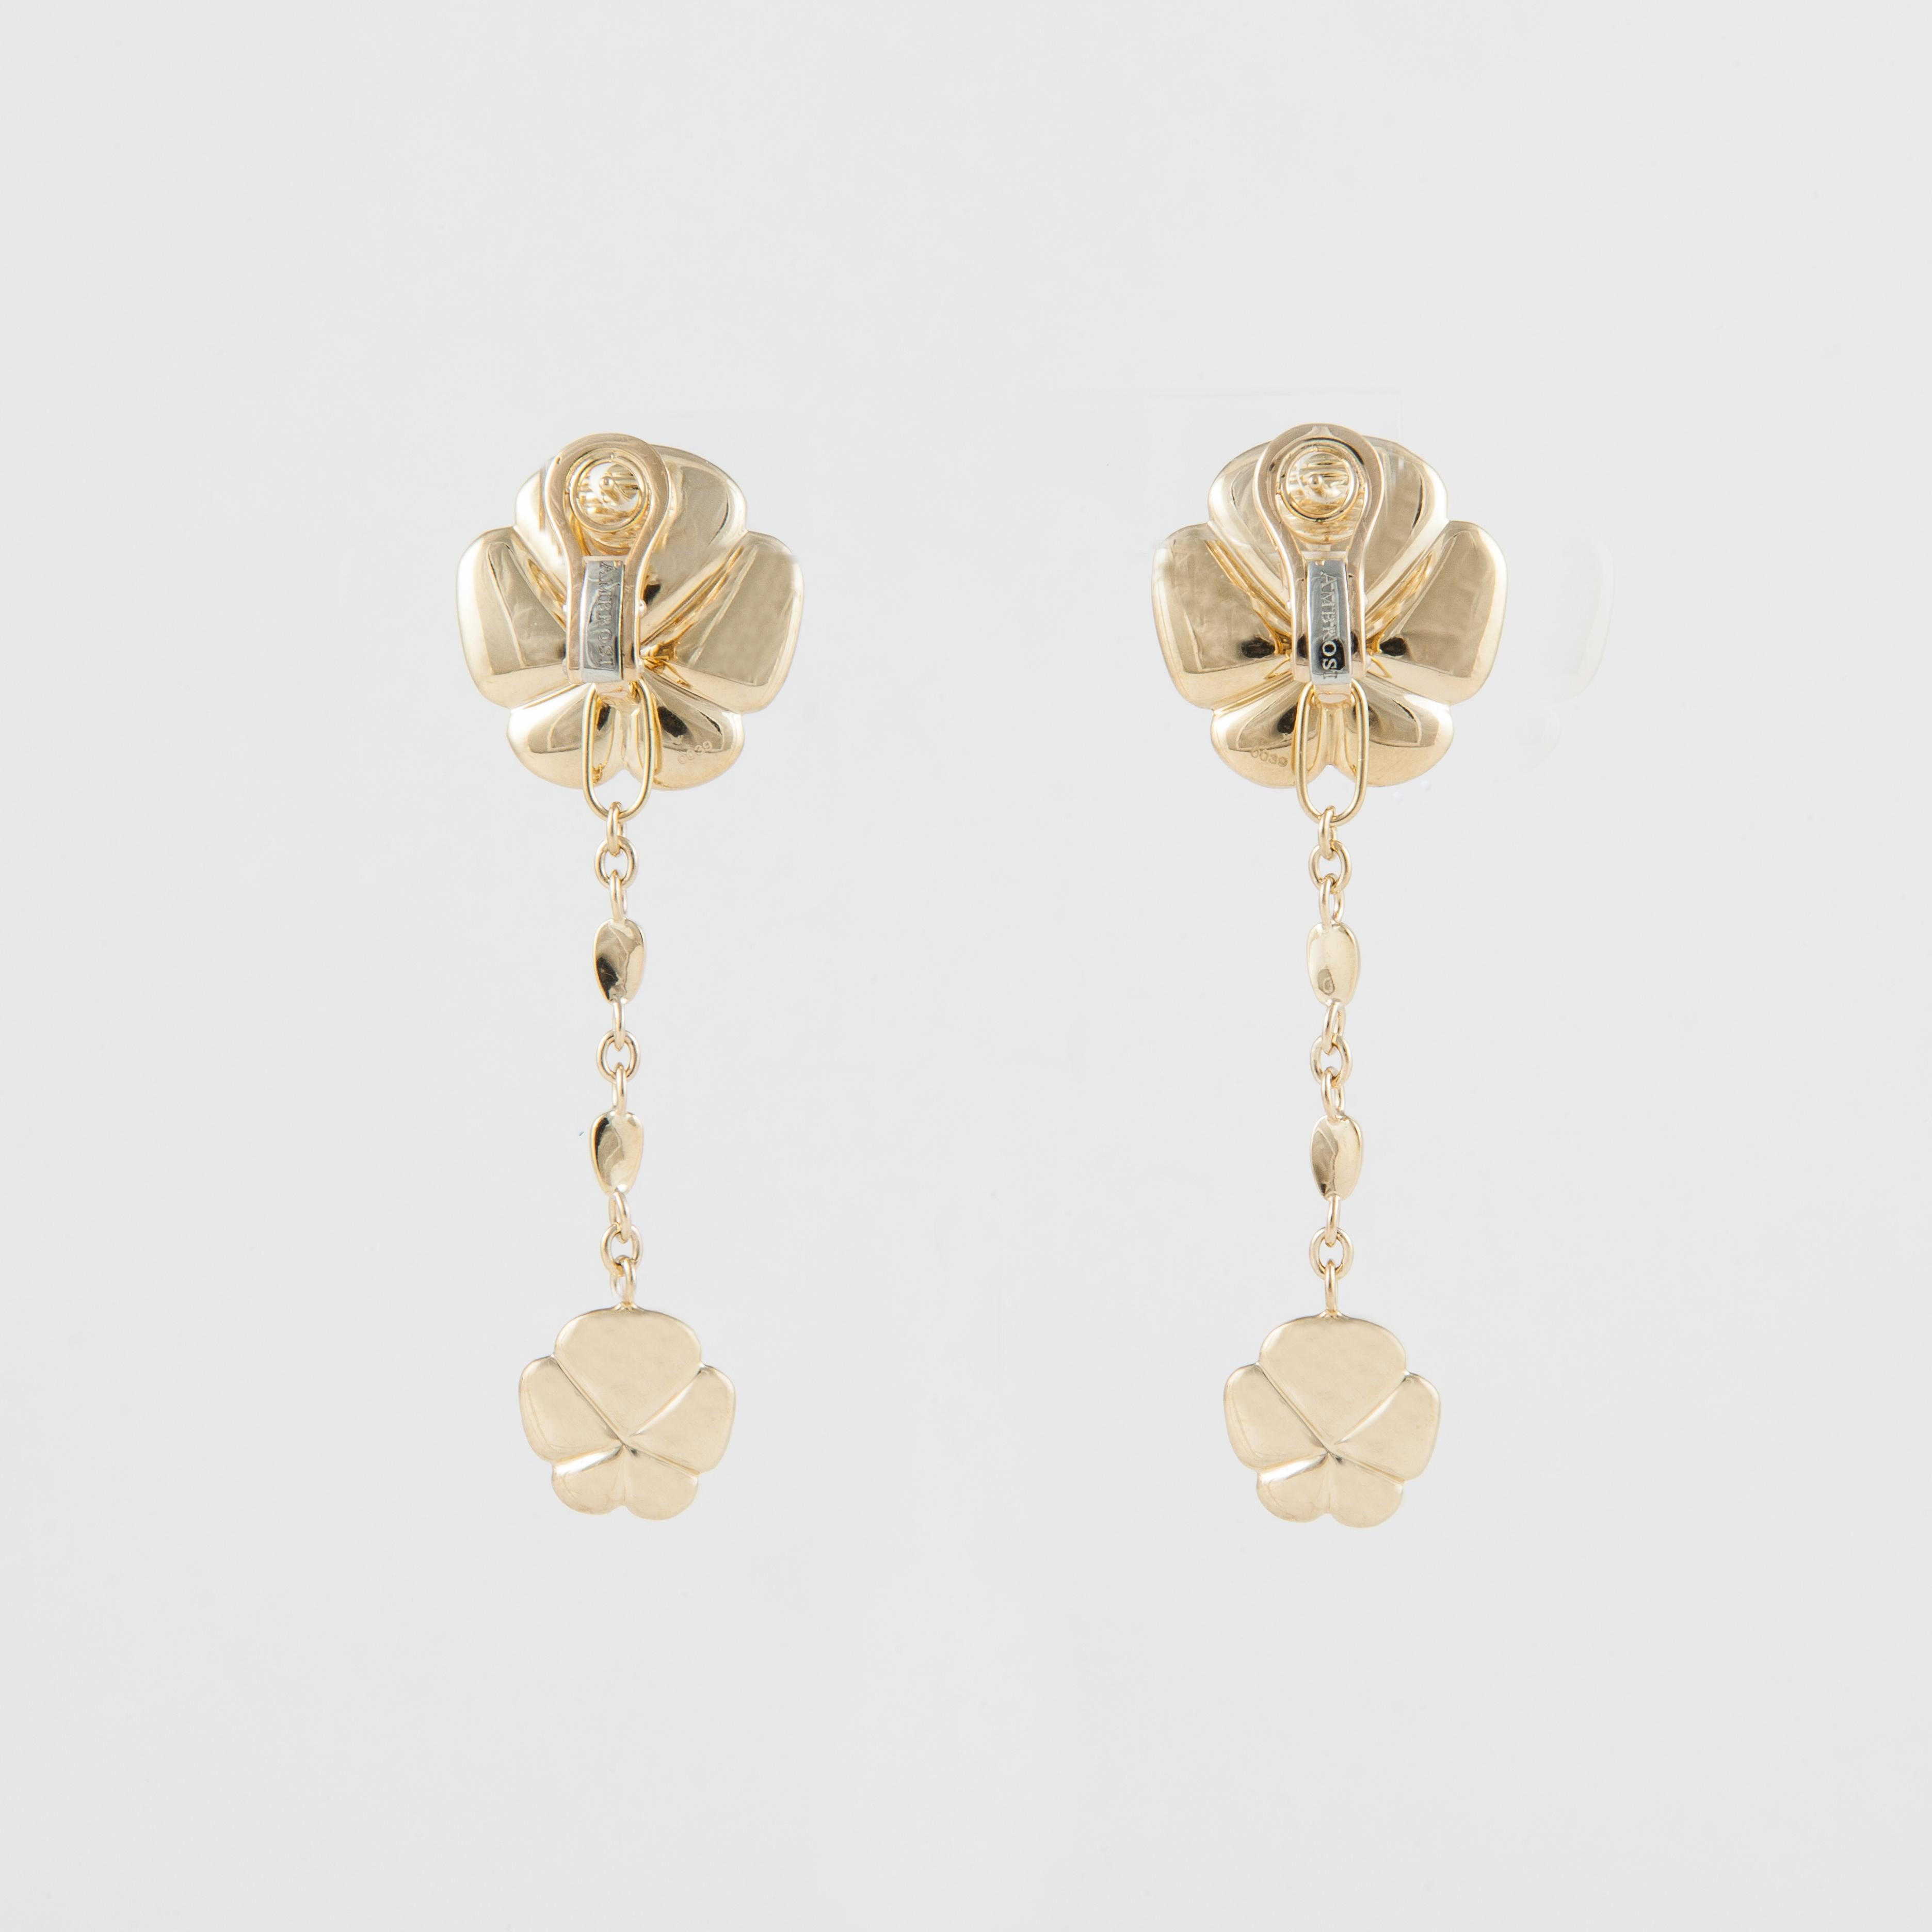 Ambrosi 18K yellow gold dangle earrings featuring a large clover like leaf at the top and dangling from a chain is a smaller version.  Measure 2 1/2 inches long and 7/8 inches wide.  They are for pierced ears with a lever back.